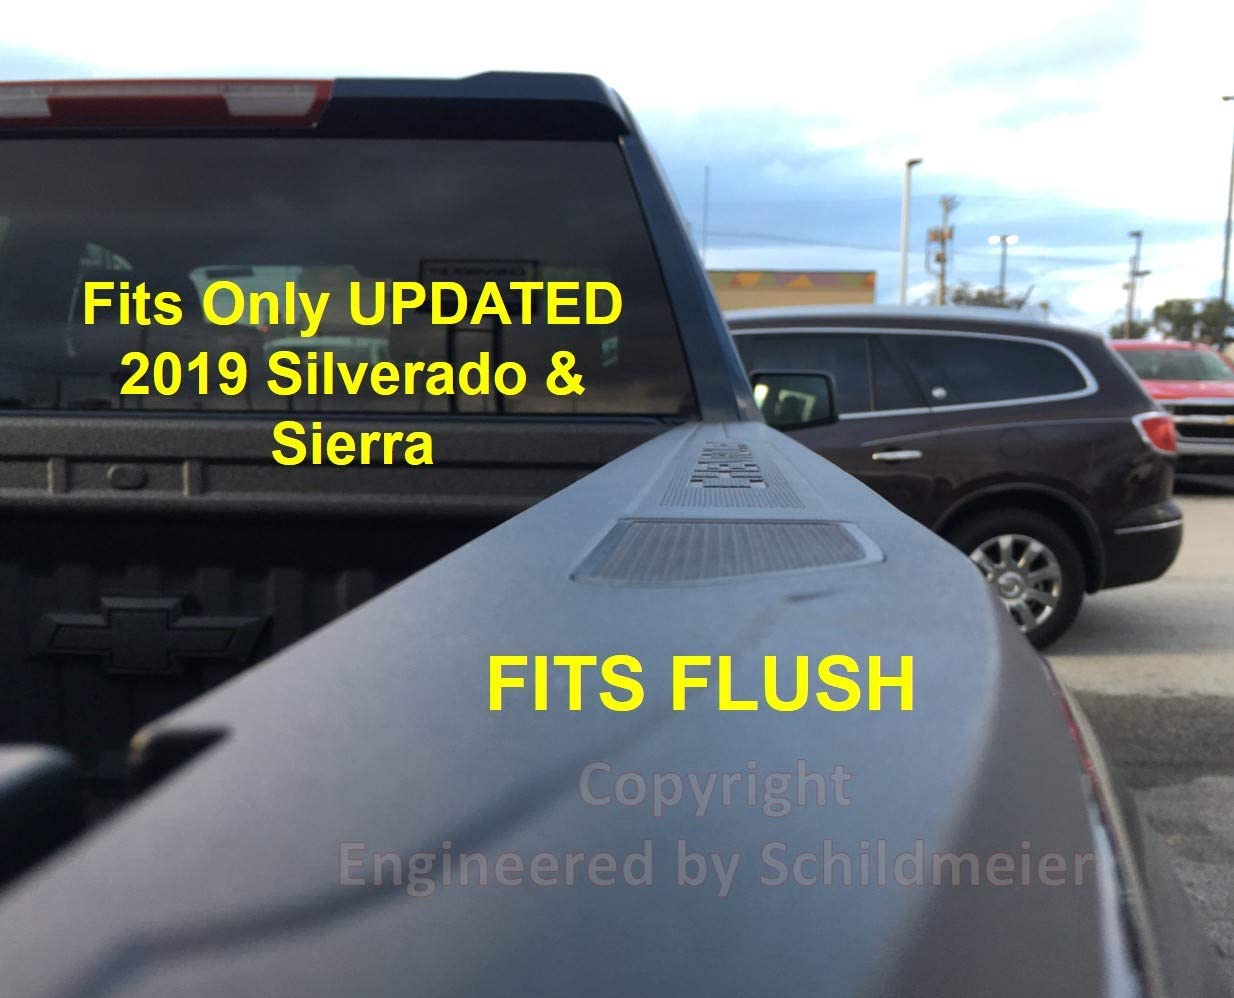 Truck bed rail of 2019 Chevy Silverado pickup showing flush fit Railcaps stake pocket cover with text overlay indicating these Railcaps stake pocket covers fit flush into the truck bed rails of 2019 and 2020 Chevy Silverado and GMC Sierra pickup trucks. Image is copyright Engineered by Schildmeier.